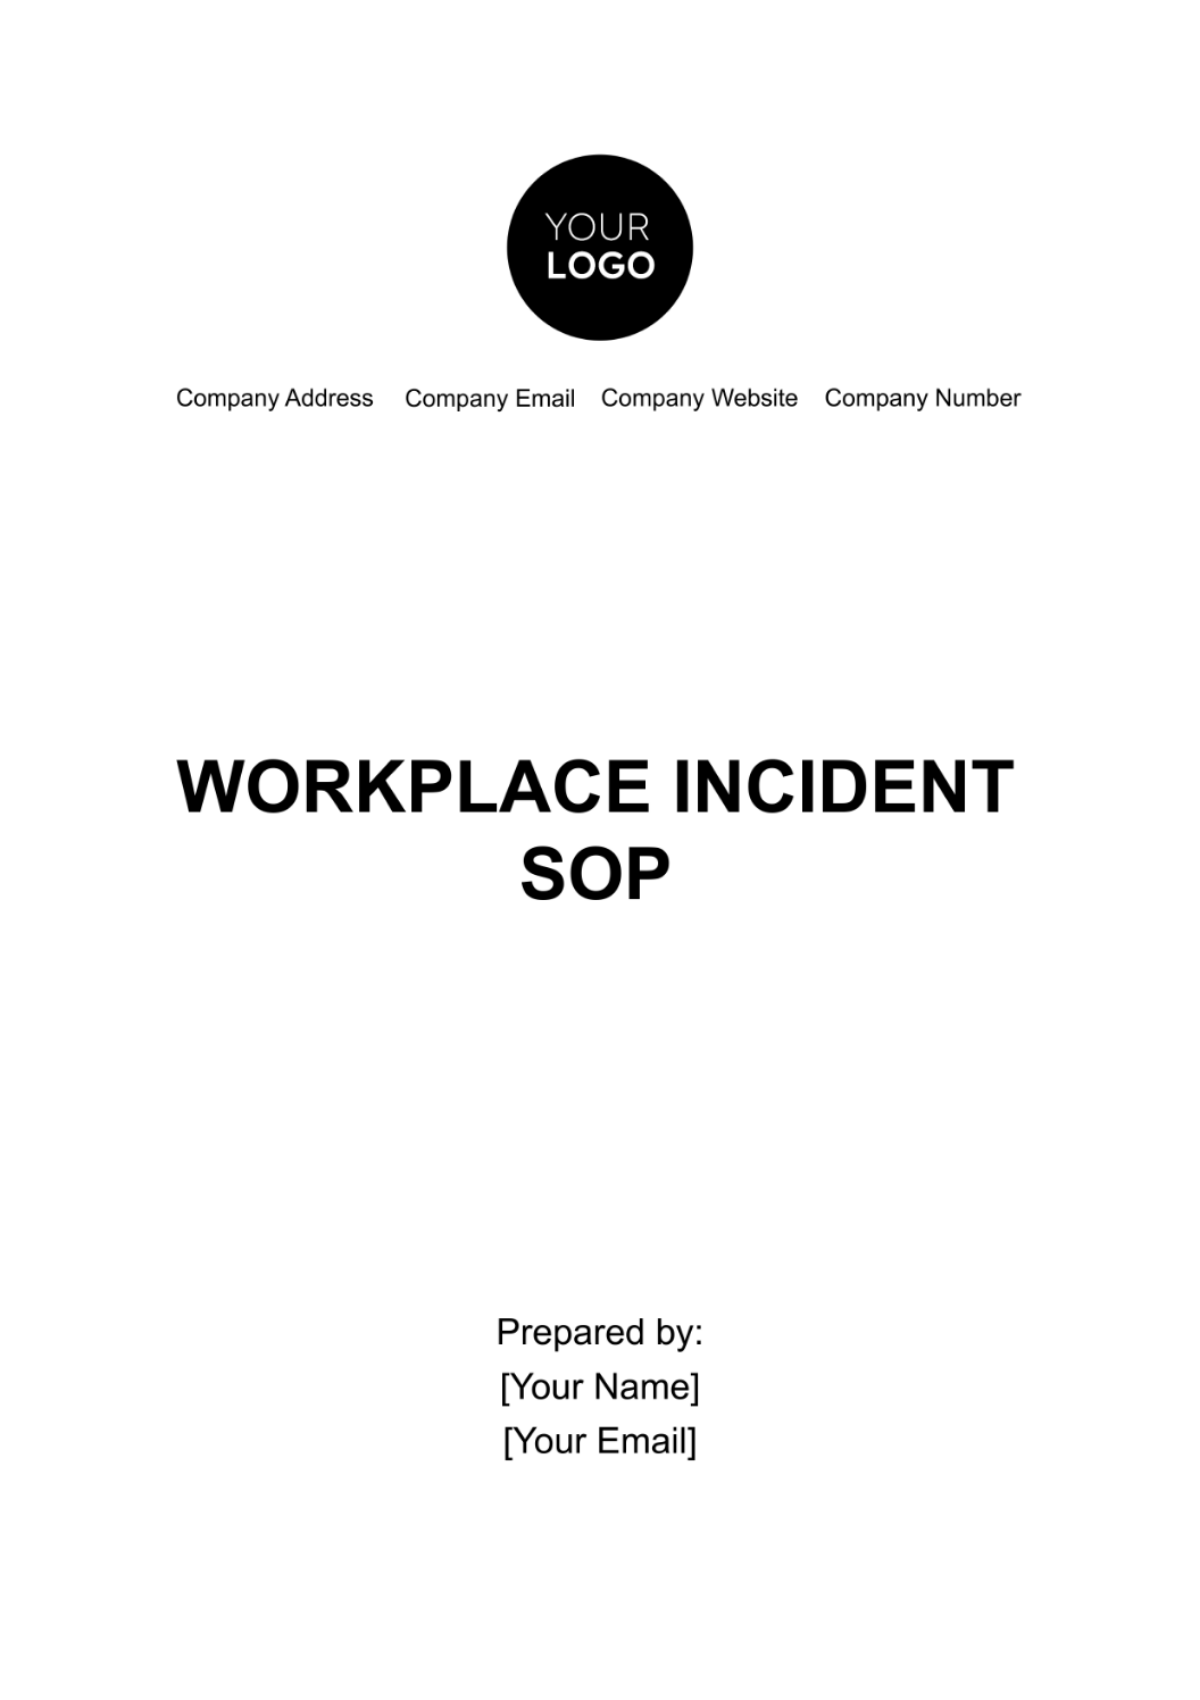 Workplace Incident SOP Template